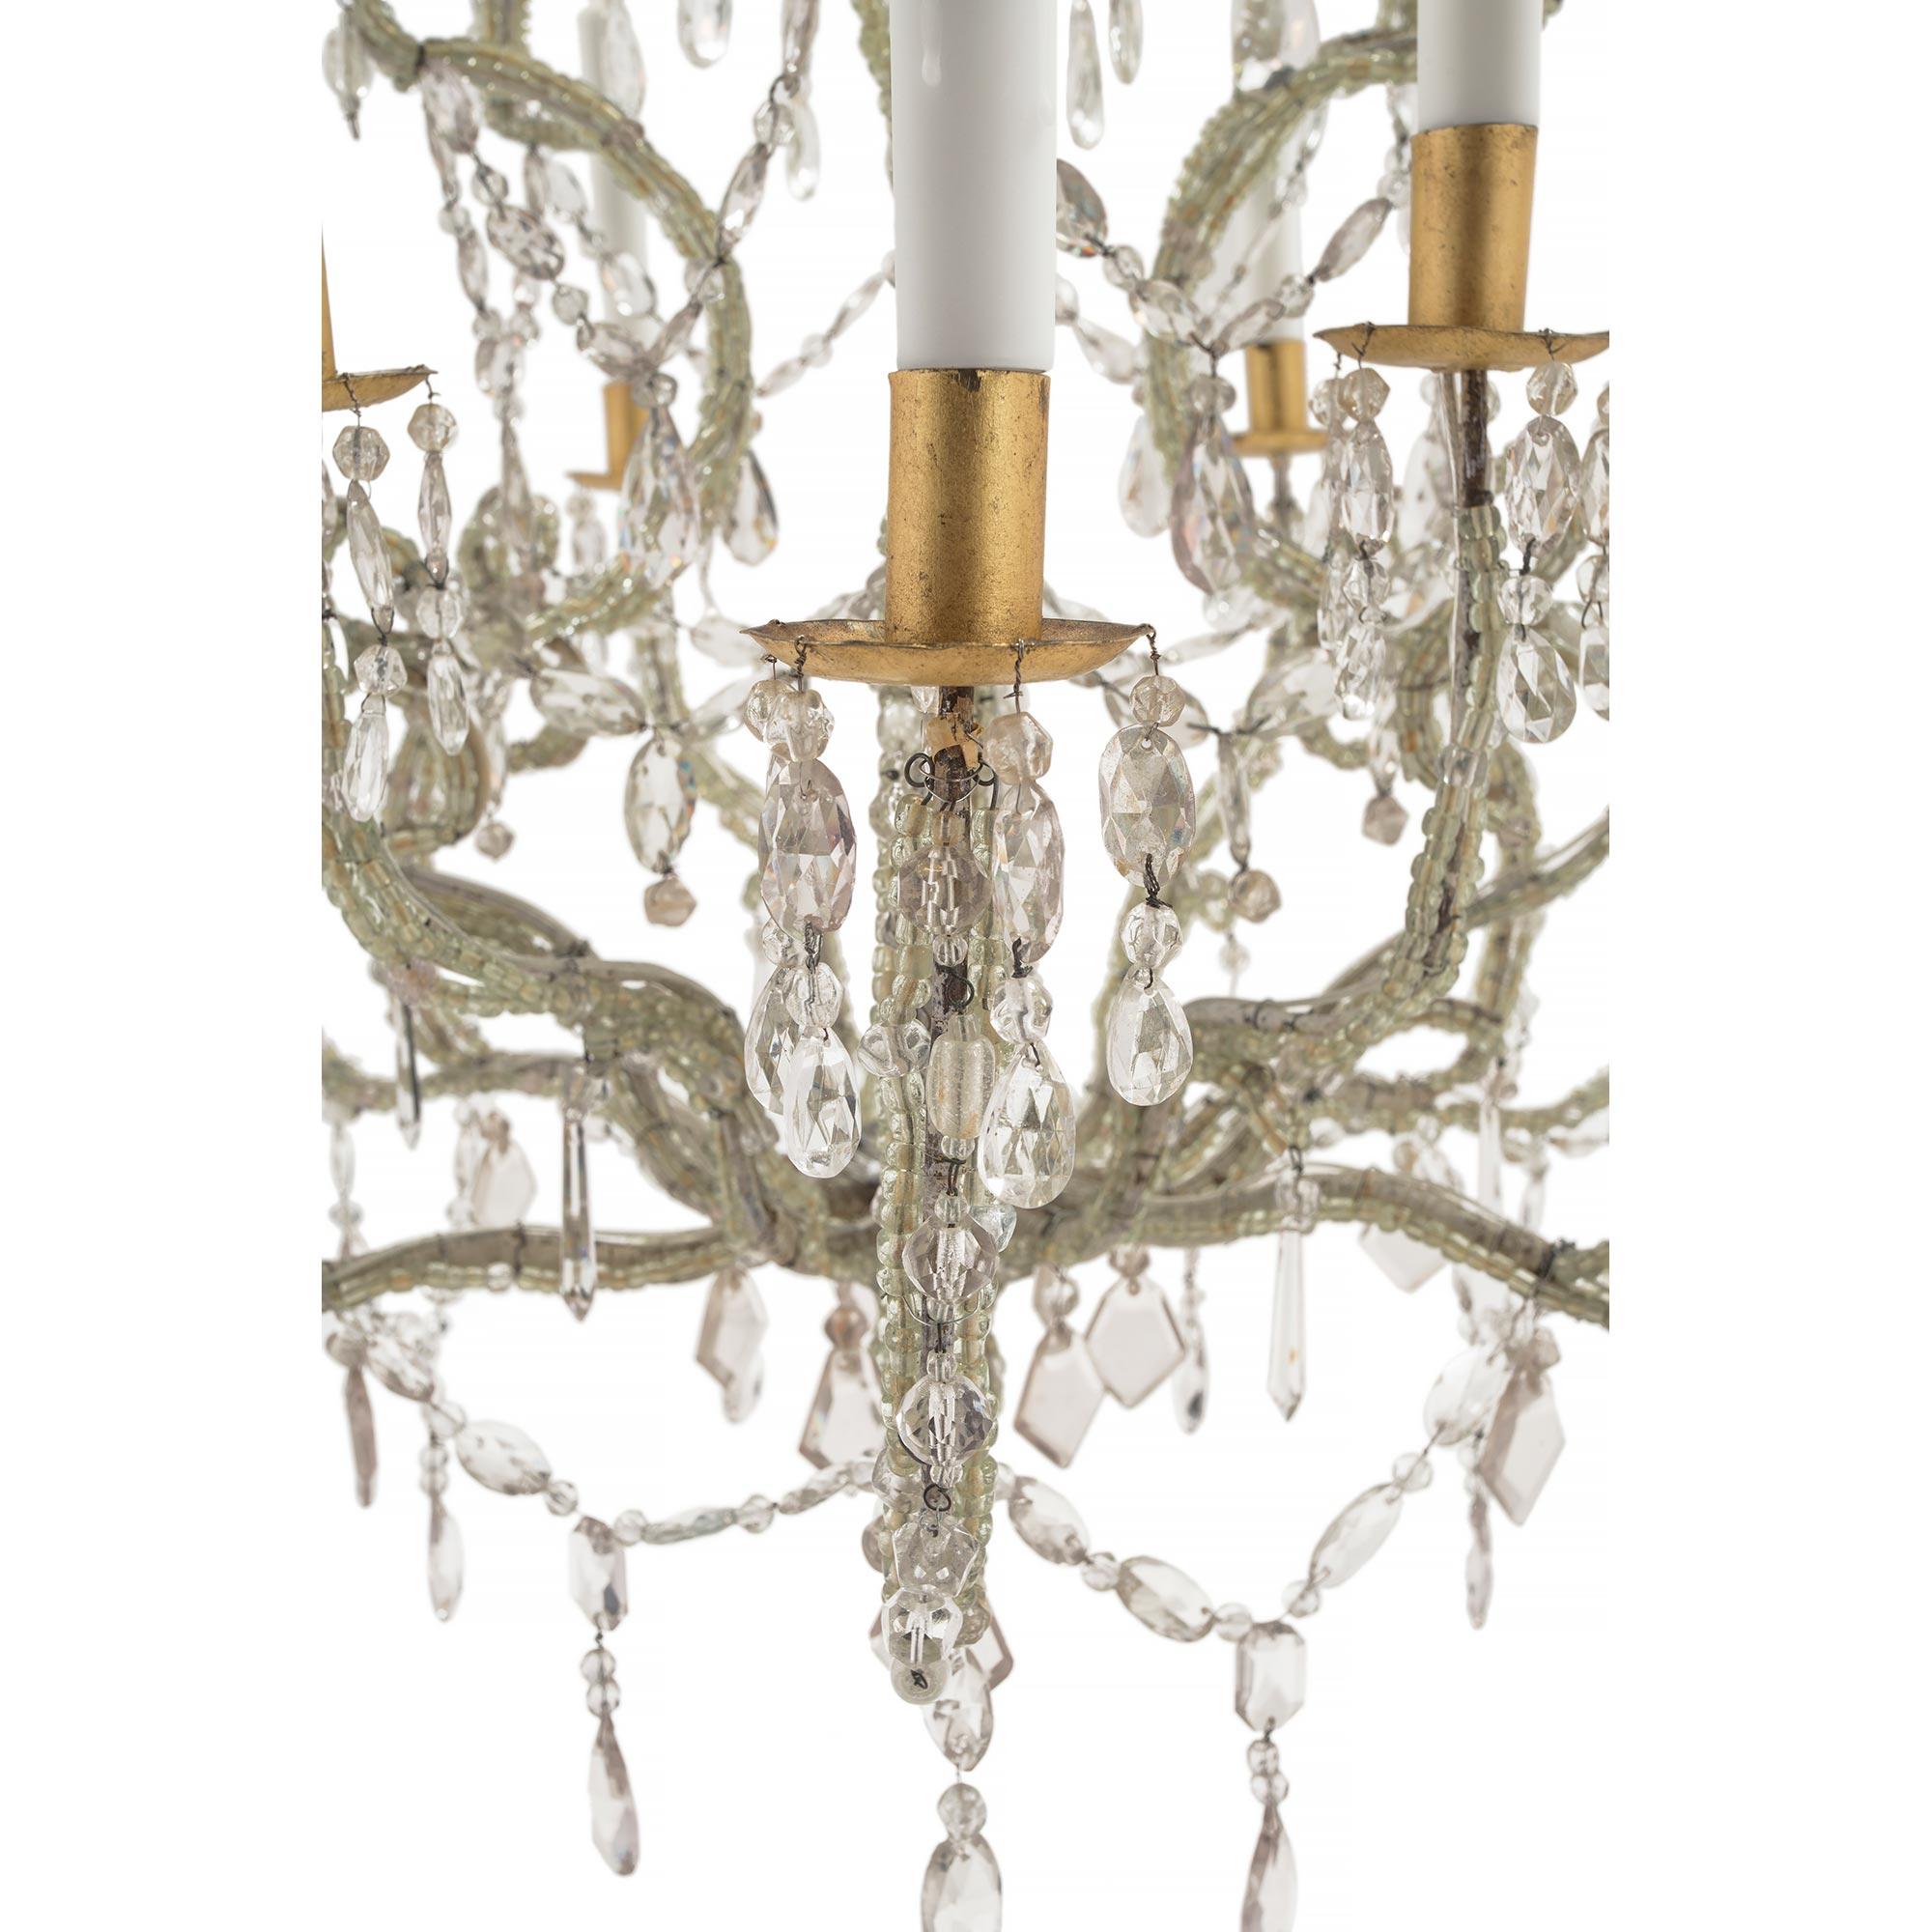 Italian Early 19th Century Louis XV Style Iron, Gilt and Crystal Chandelier For Sale 1